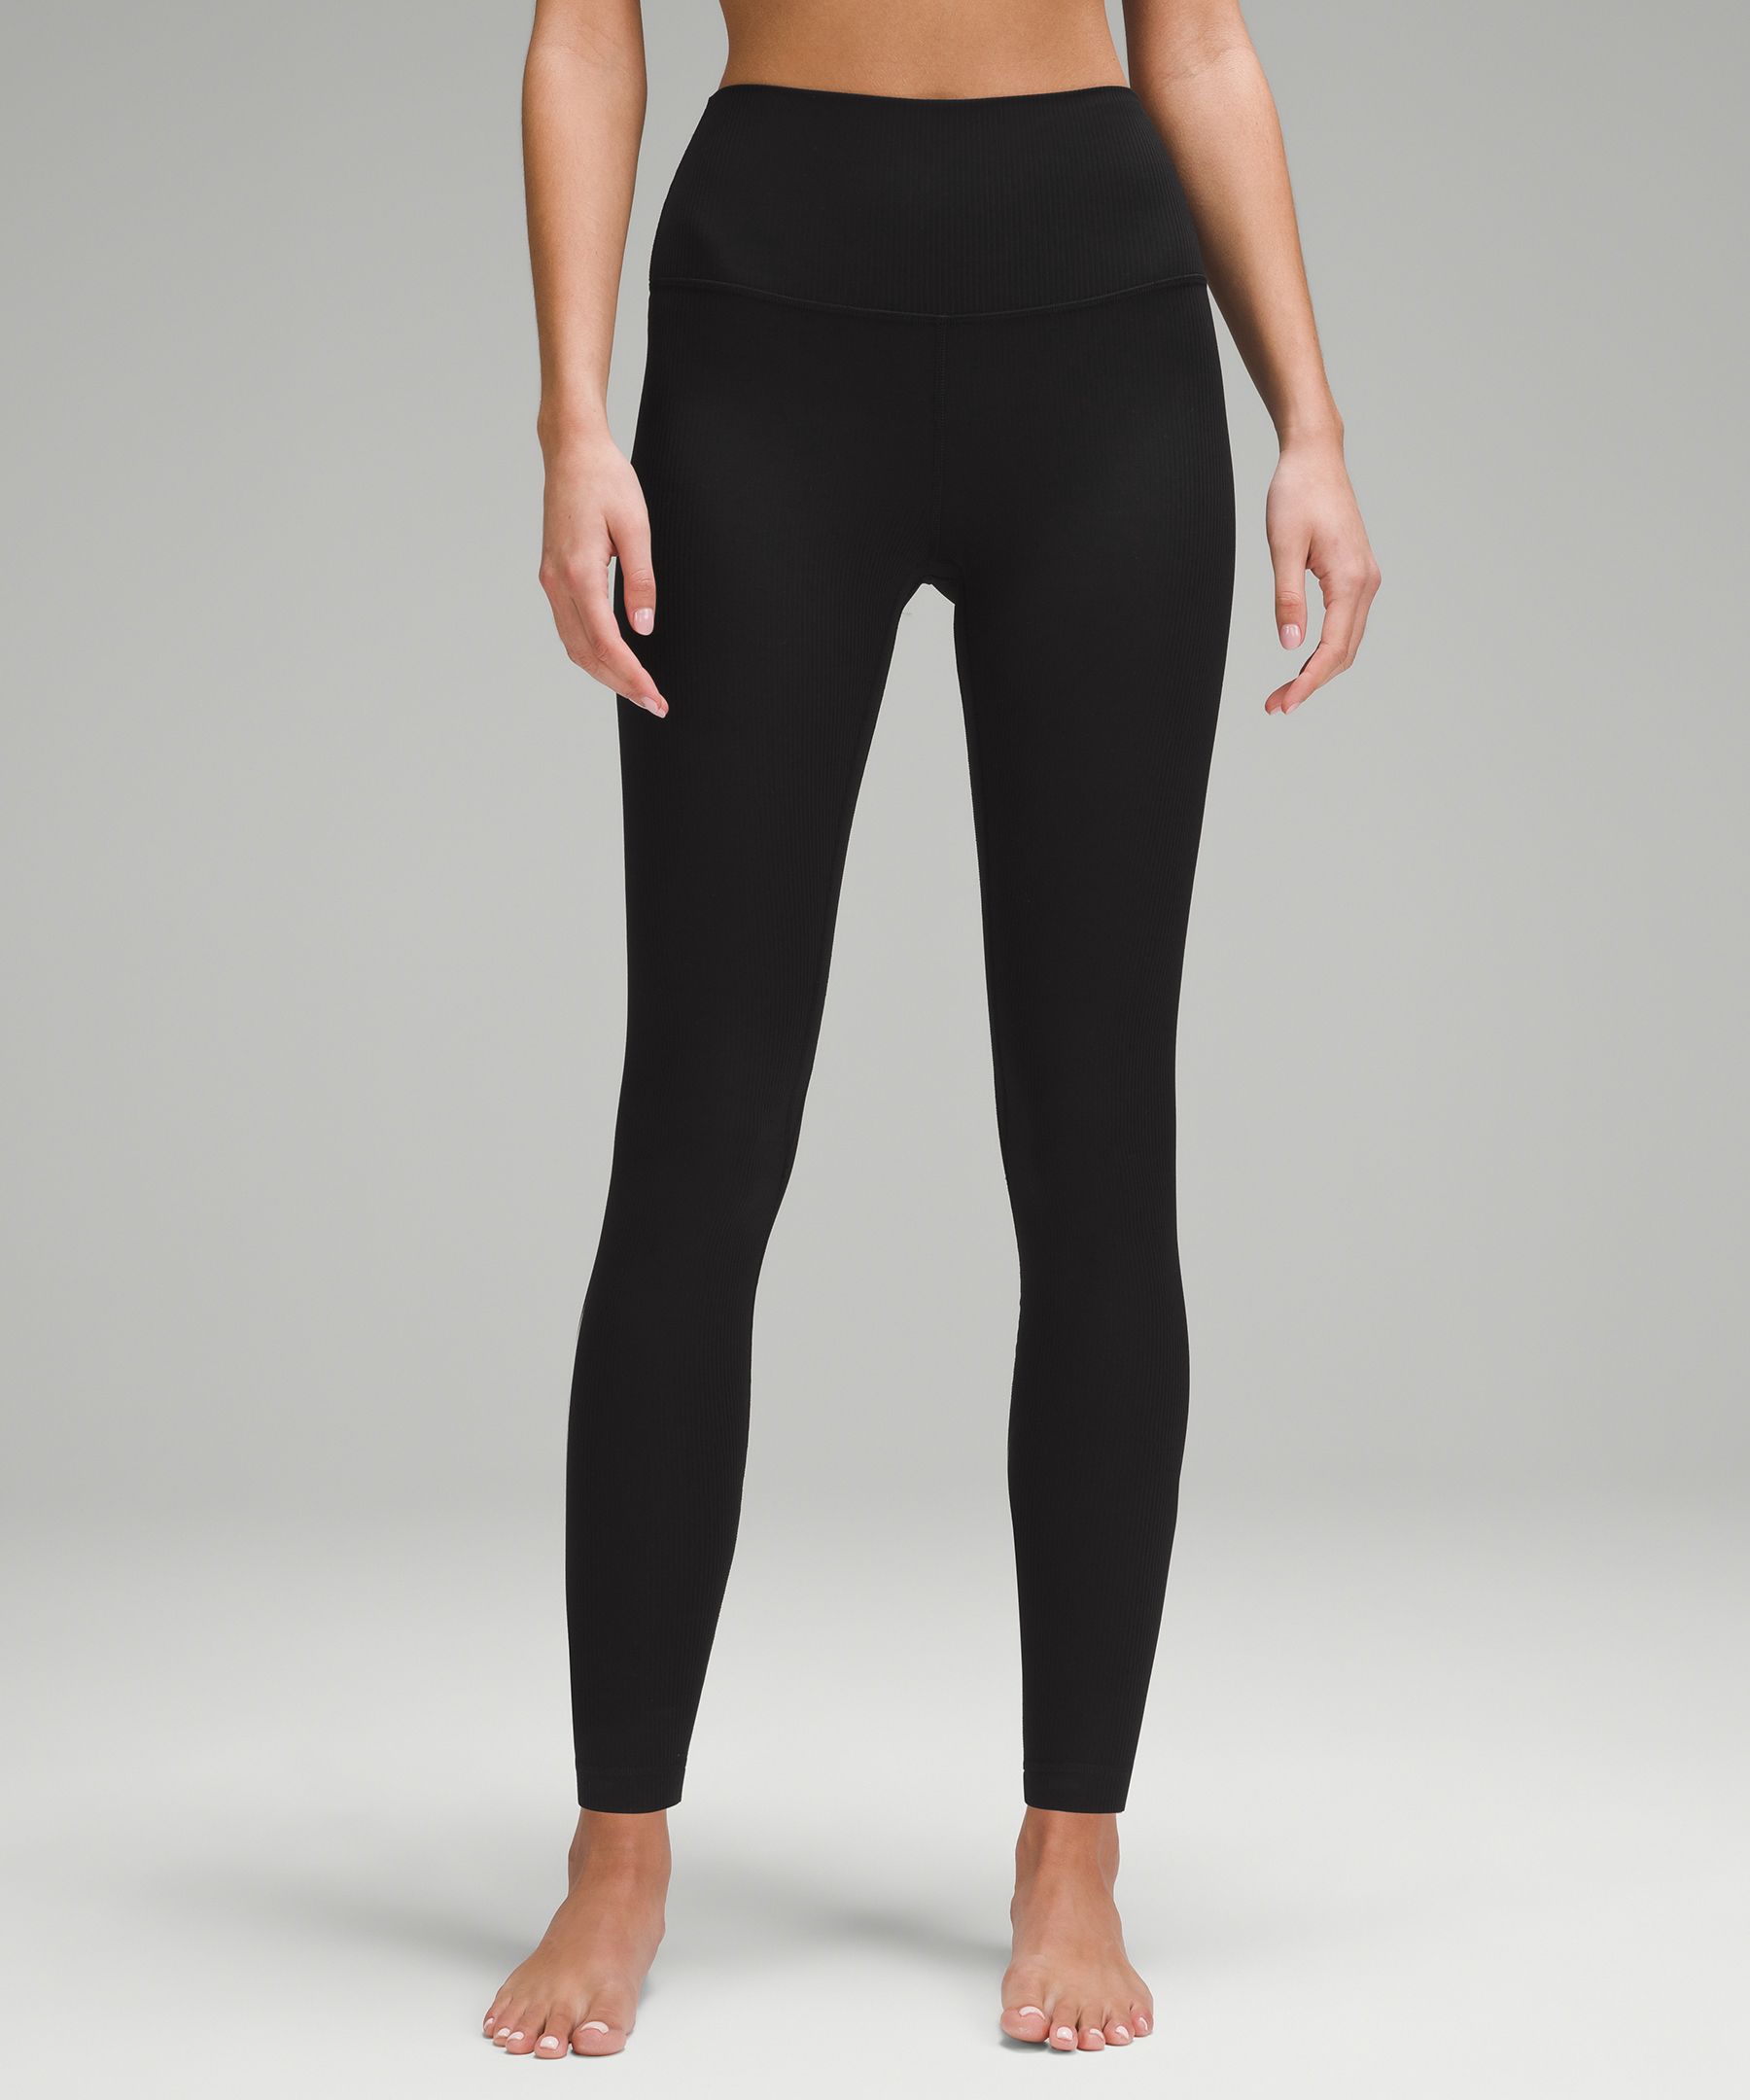 Lululemon Align Ribbed 25” Red Size 10 - $55 (53% Off Retail) New With Tags  - From Karen